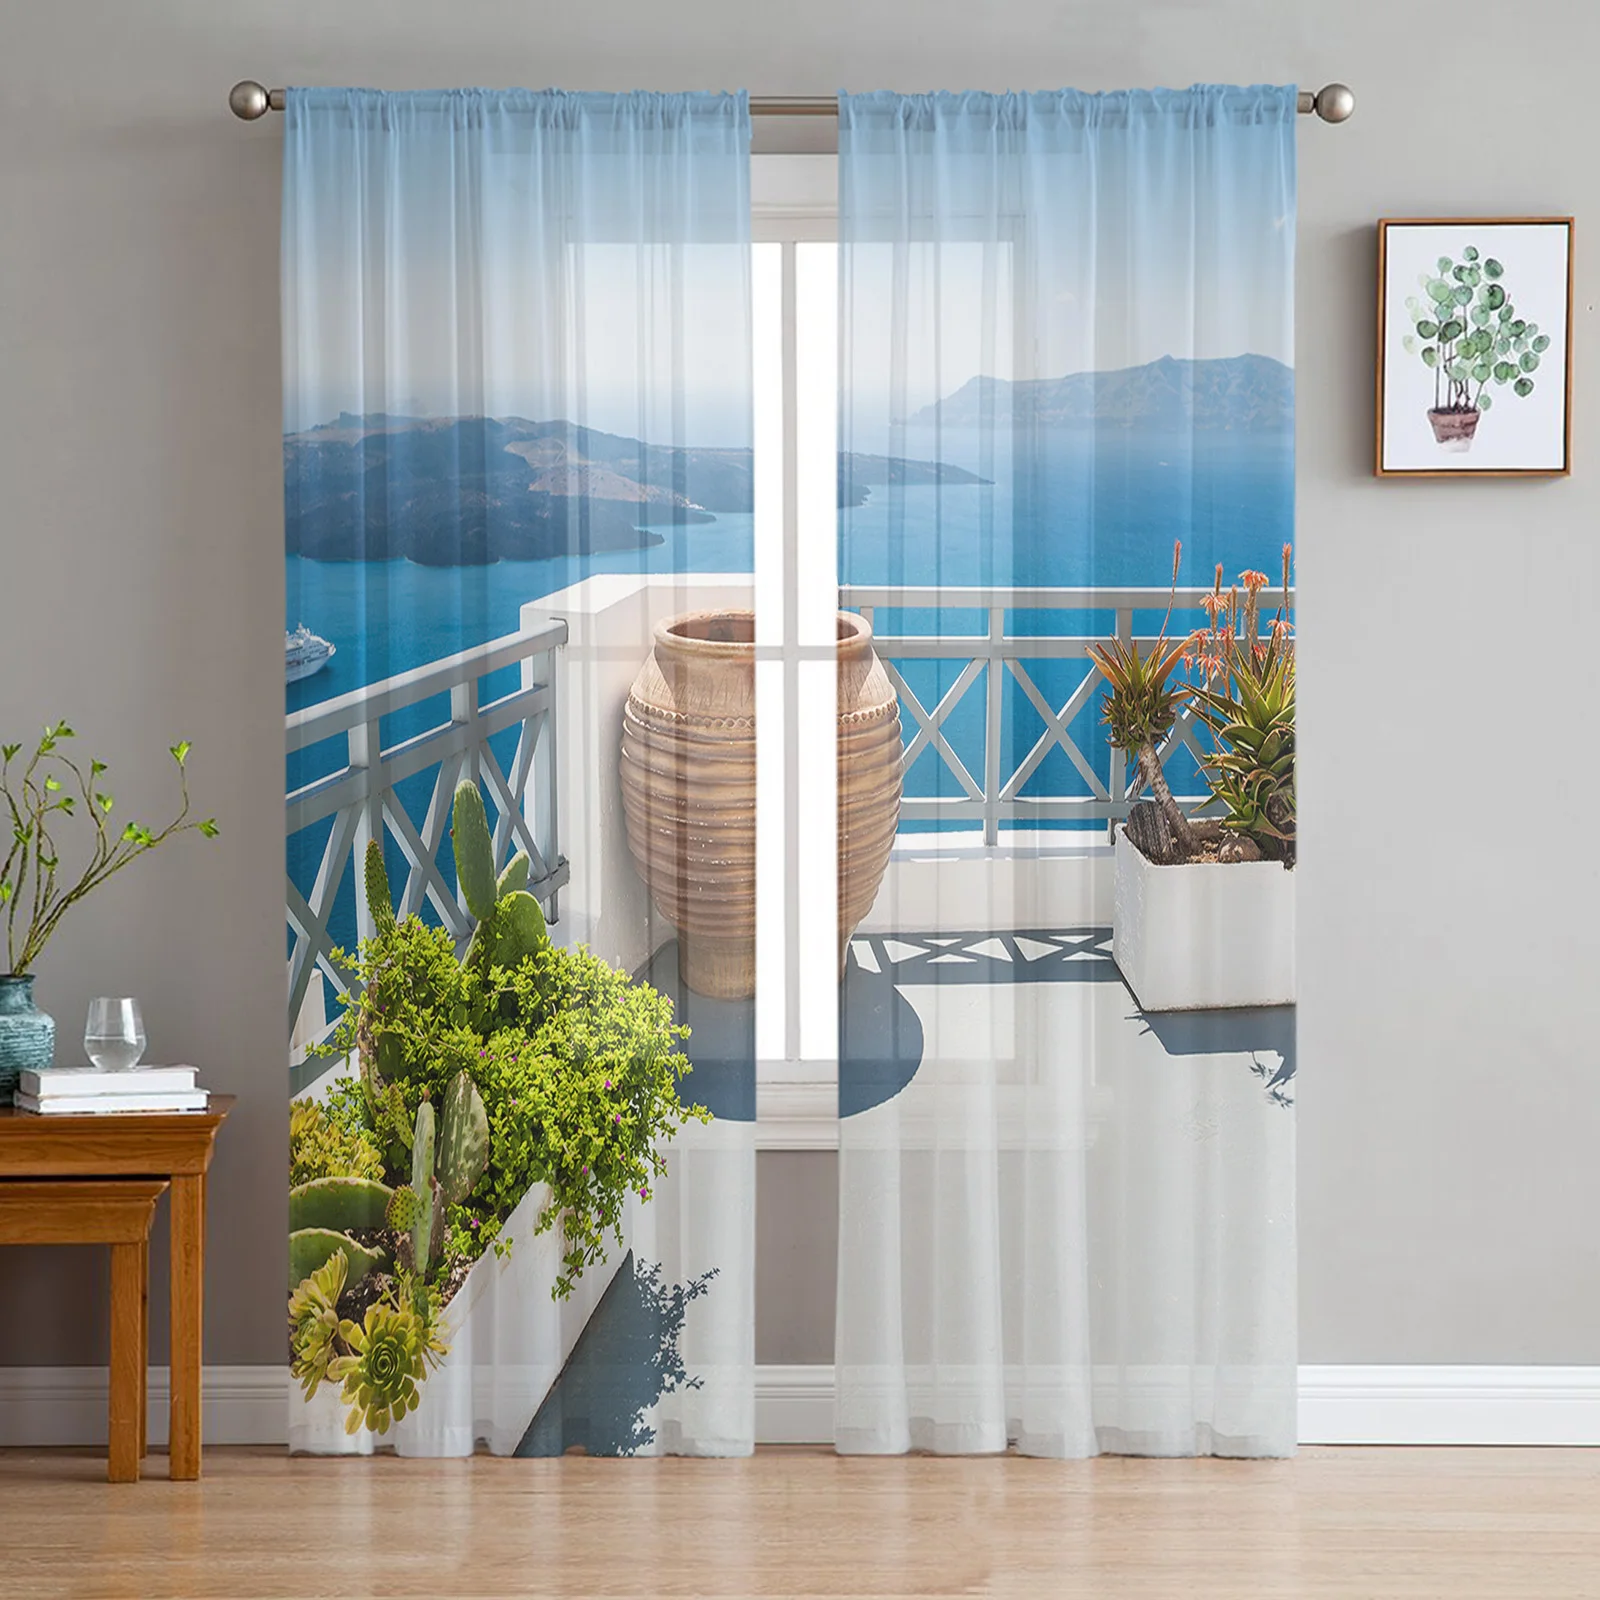 Seaside Island Boat Clay Pot Potted Cactus Sheer Curtain Living Room Window Tulle Curtain Bedroom Veiling Curtains Luxury Drapes